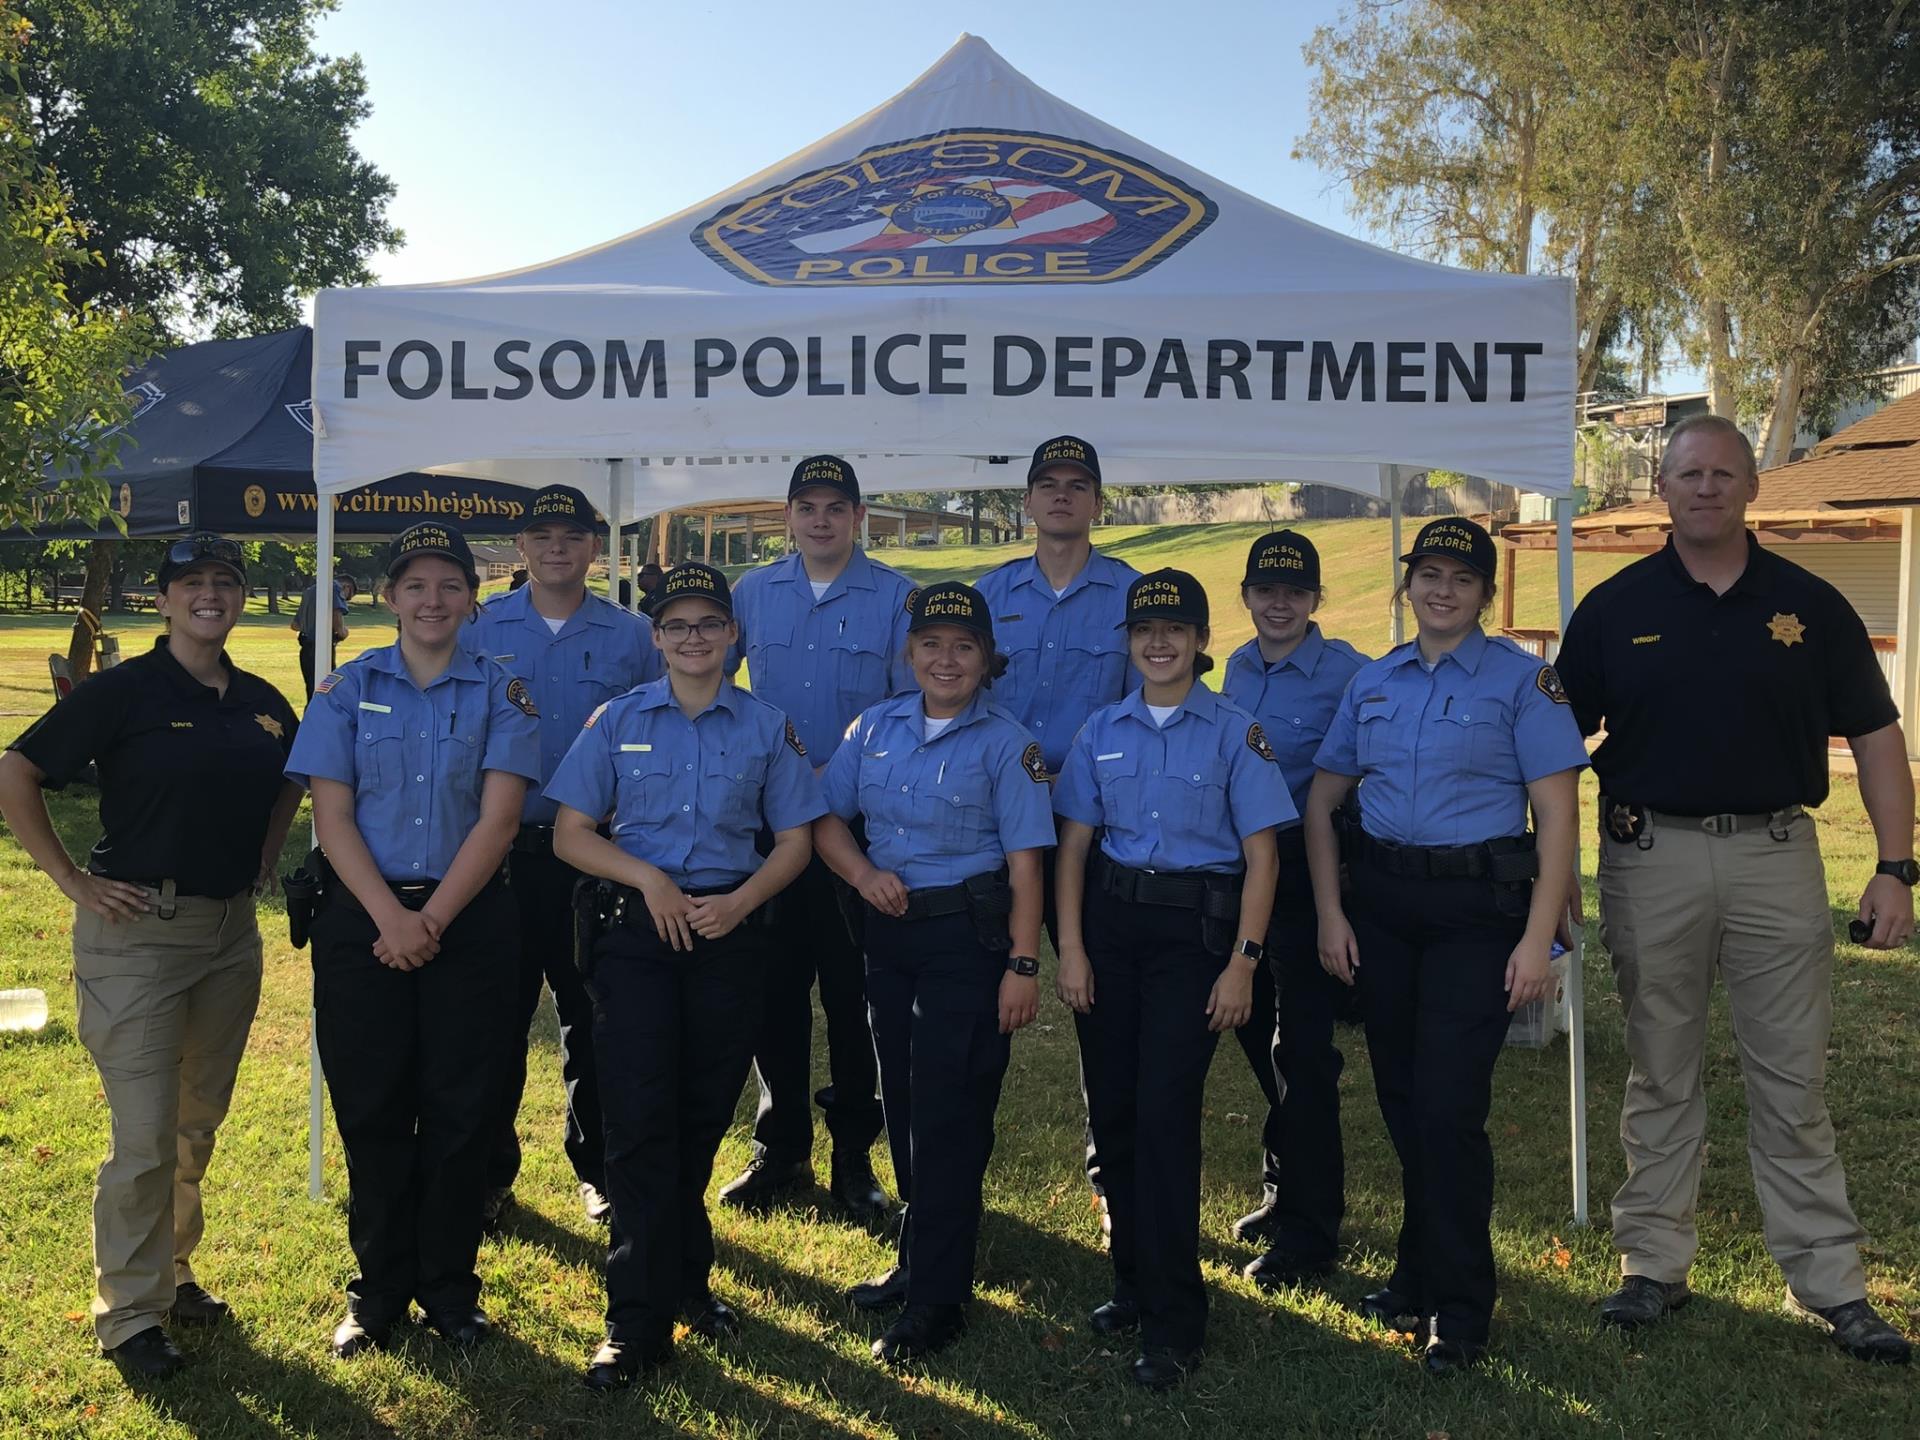 Youth Police Explorers with Leaders in front of Folsom Police Department tent